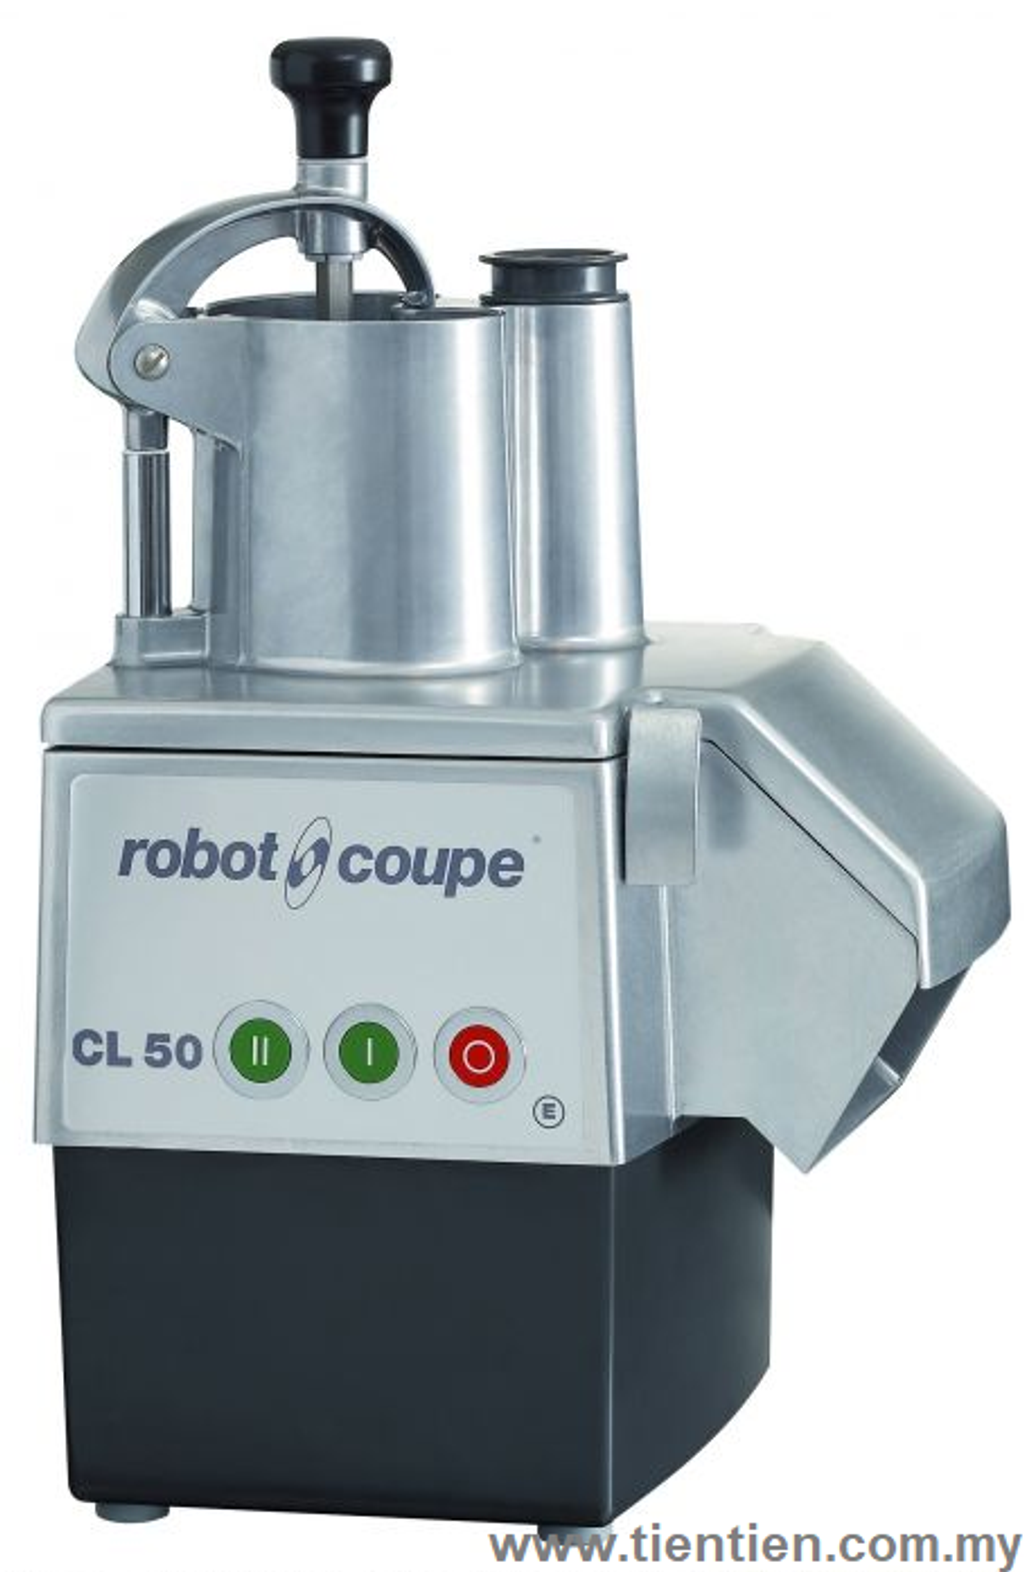 robot-coupe-preparation-machine-vegetable-slicer-cut-chop-ingredient-cl50e-tientien-malaysia.png